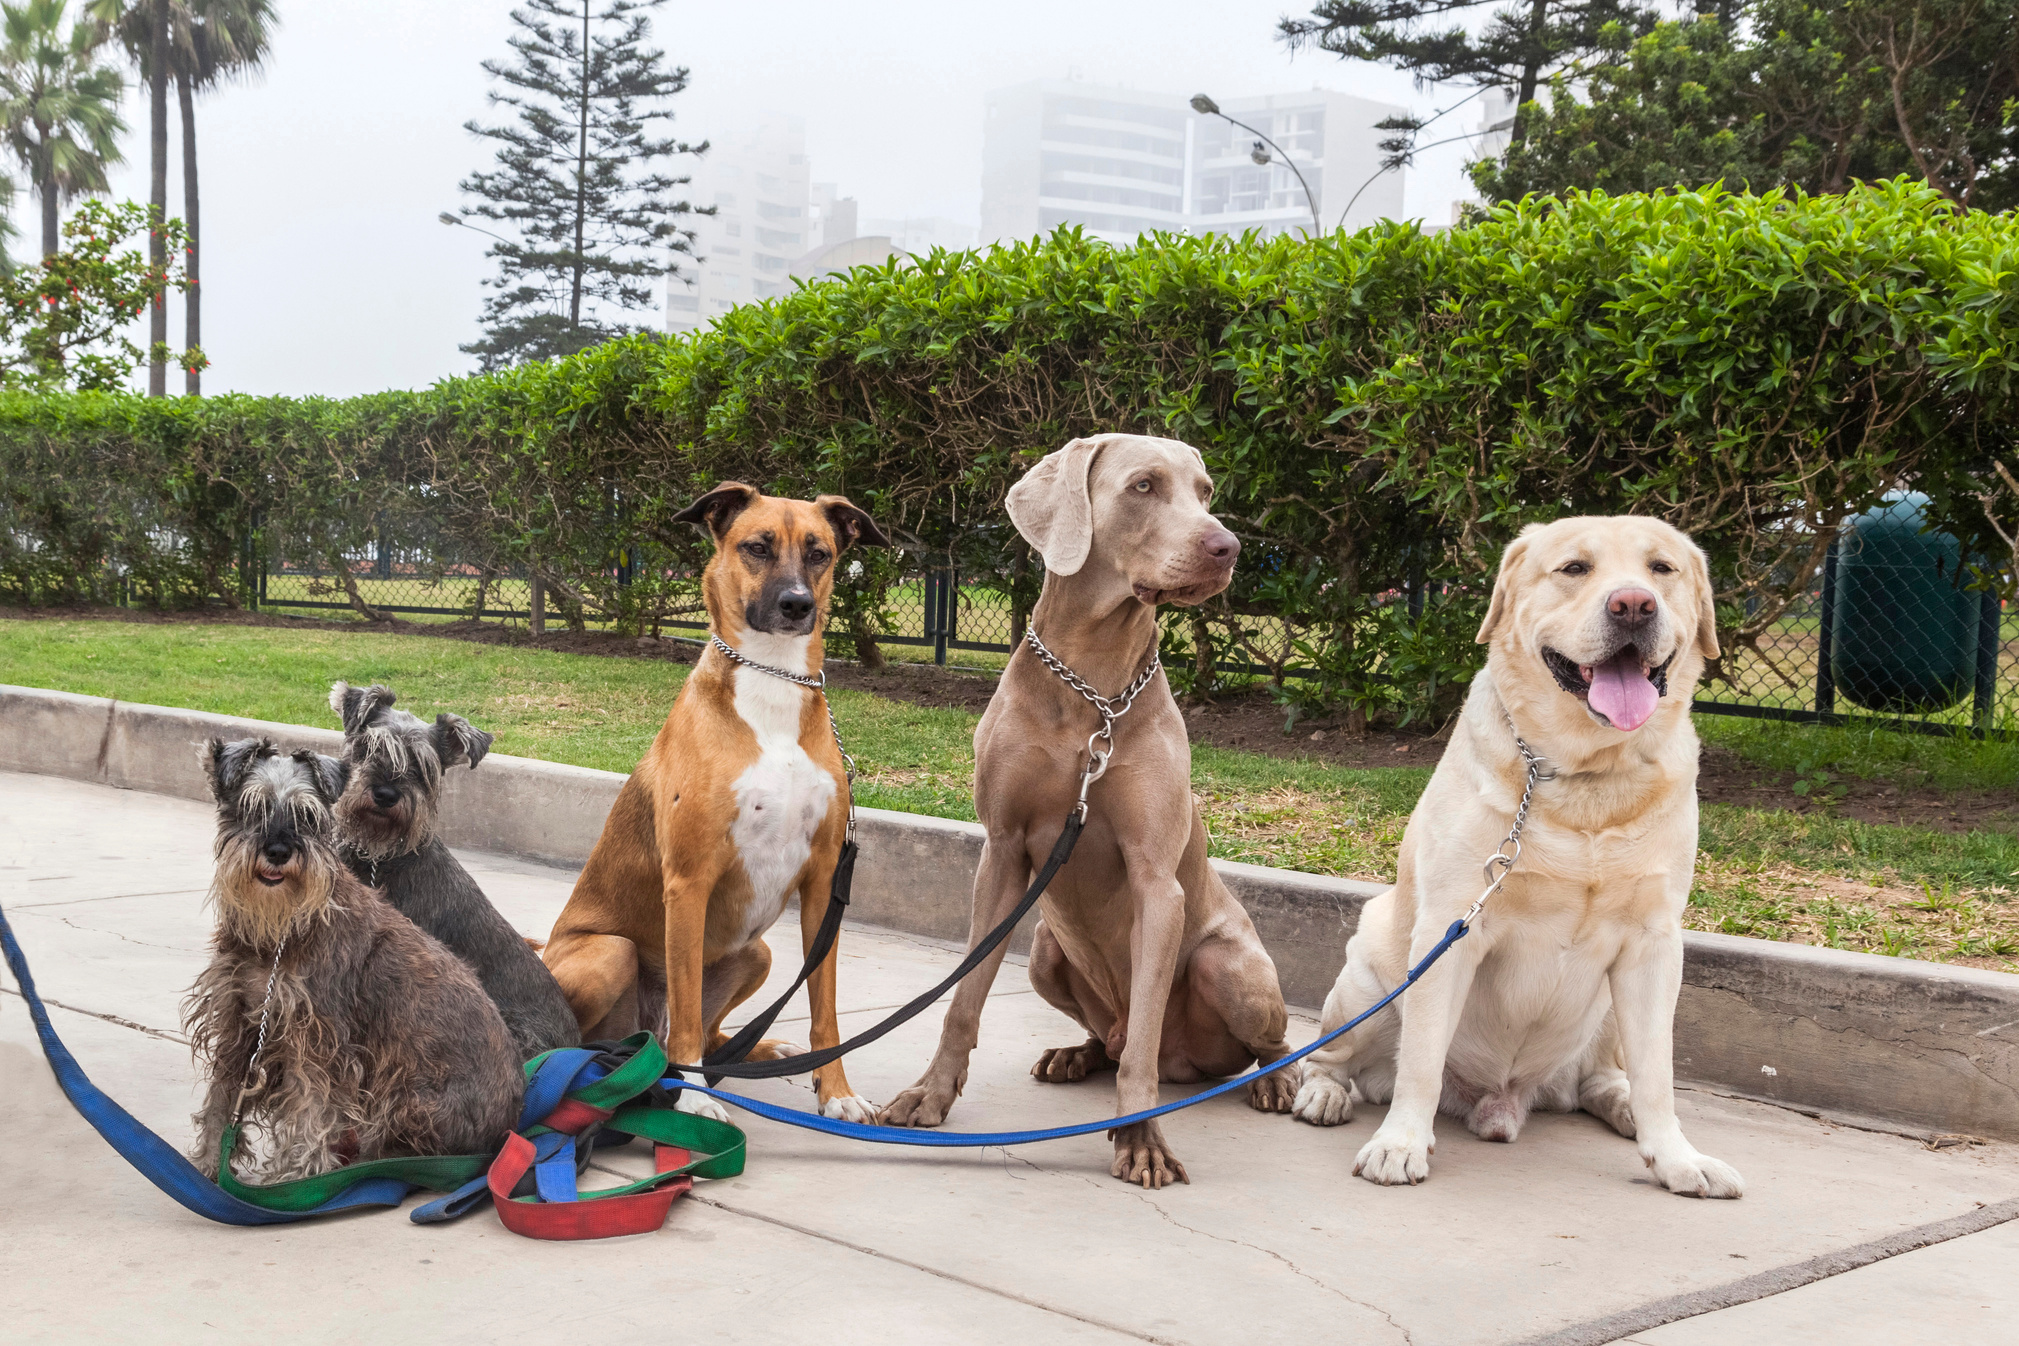 Dogs of different breeds for a walk. Dog walker